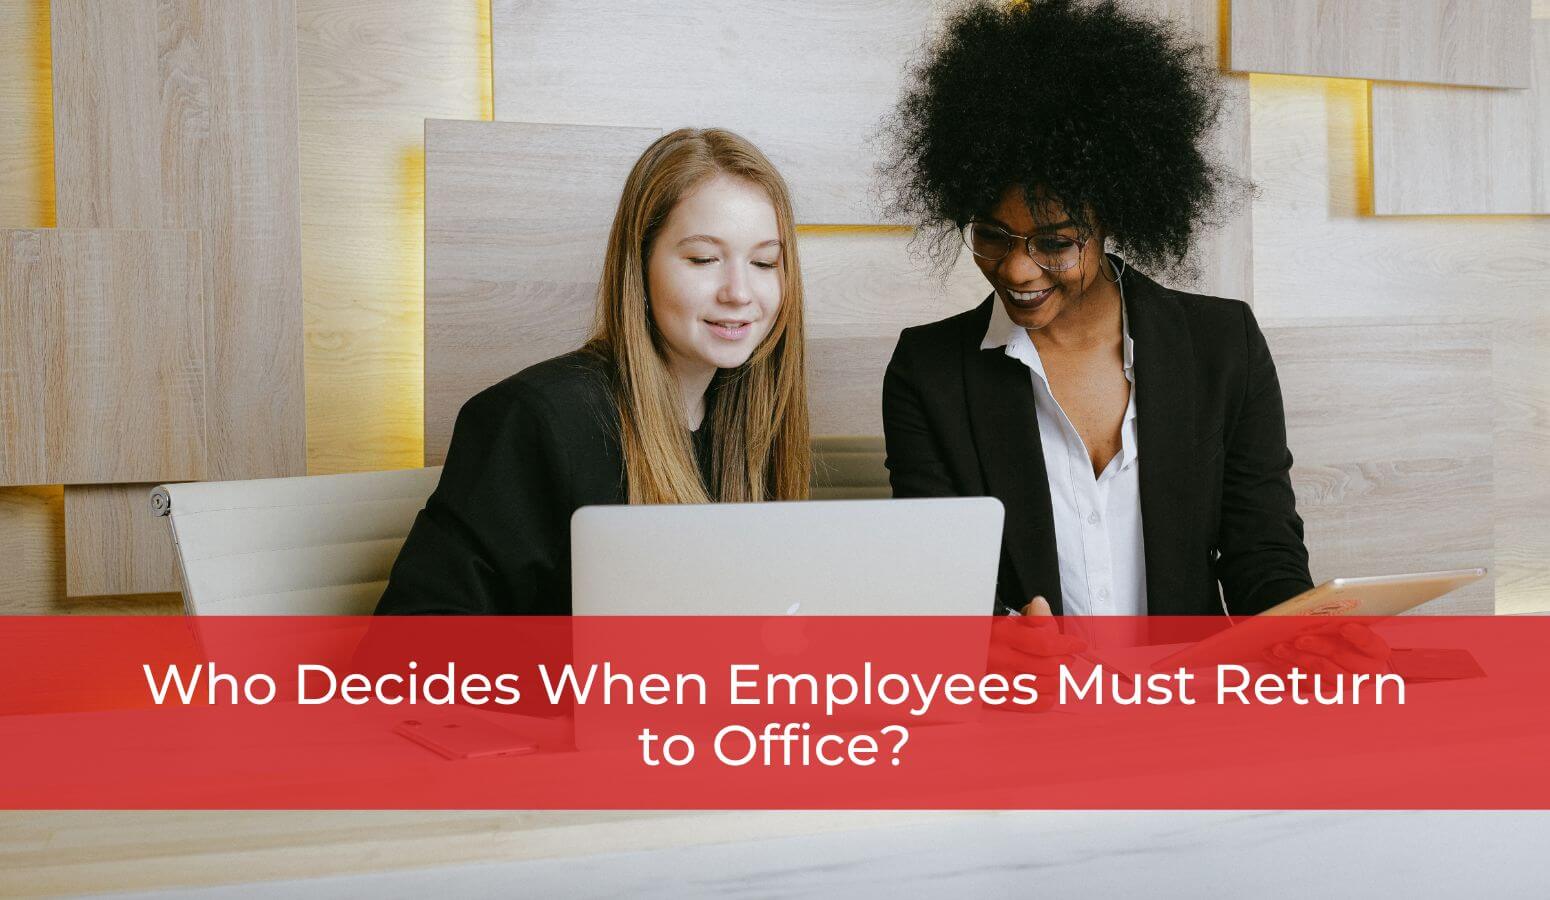 Who Decides When Employees Must Return to Office?